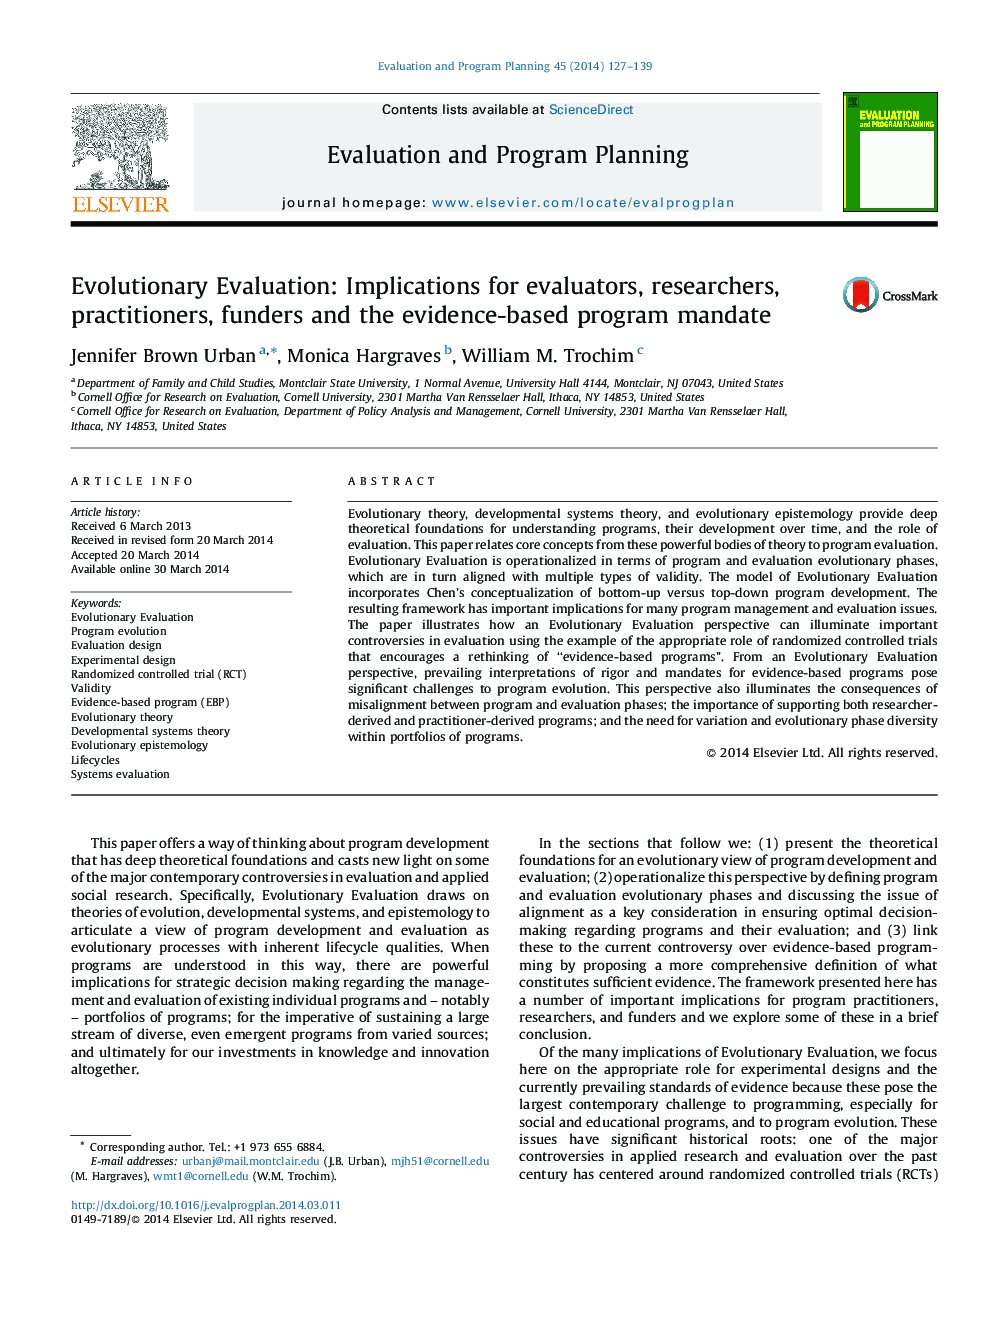 Evolutionary Evaluation: Implications for evaluators, researchers, practitioners, funders and the evidence-based program mandate